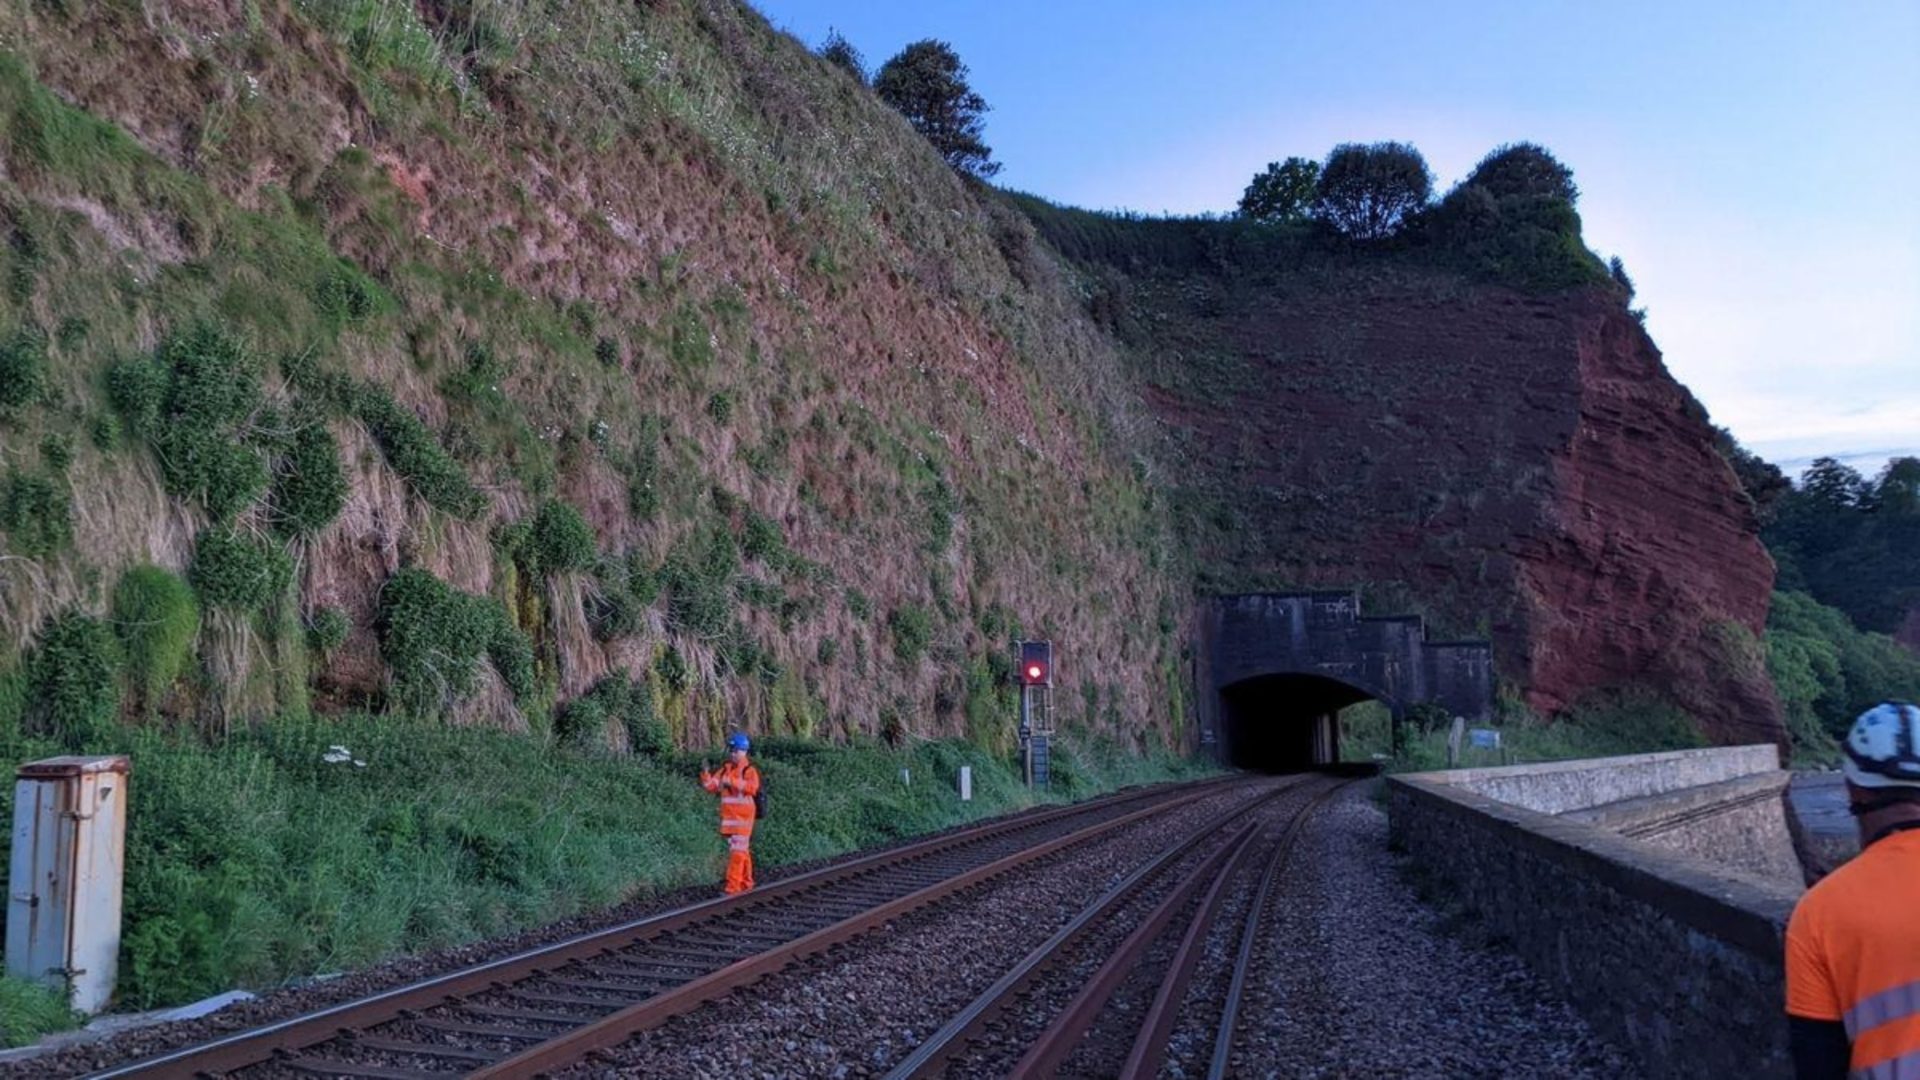 BAM coastal railway - Railway tracks heading towards a tunnel and two workers with orange high-vis jackets.